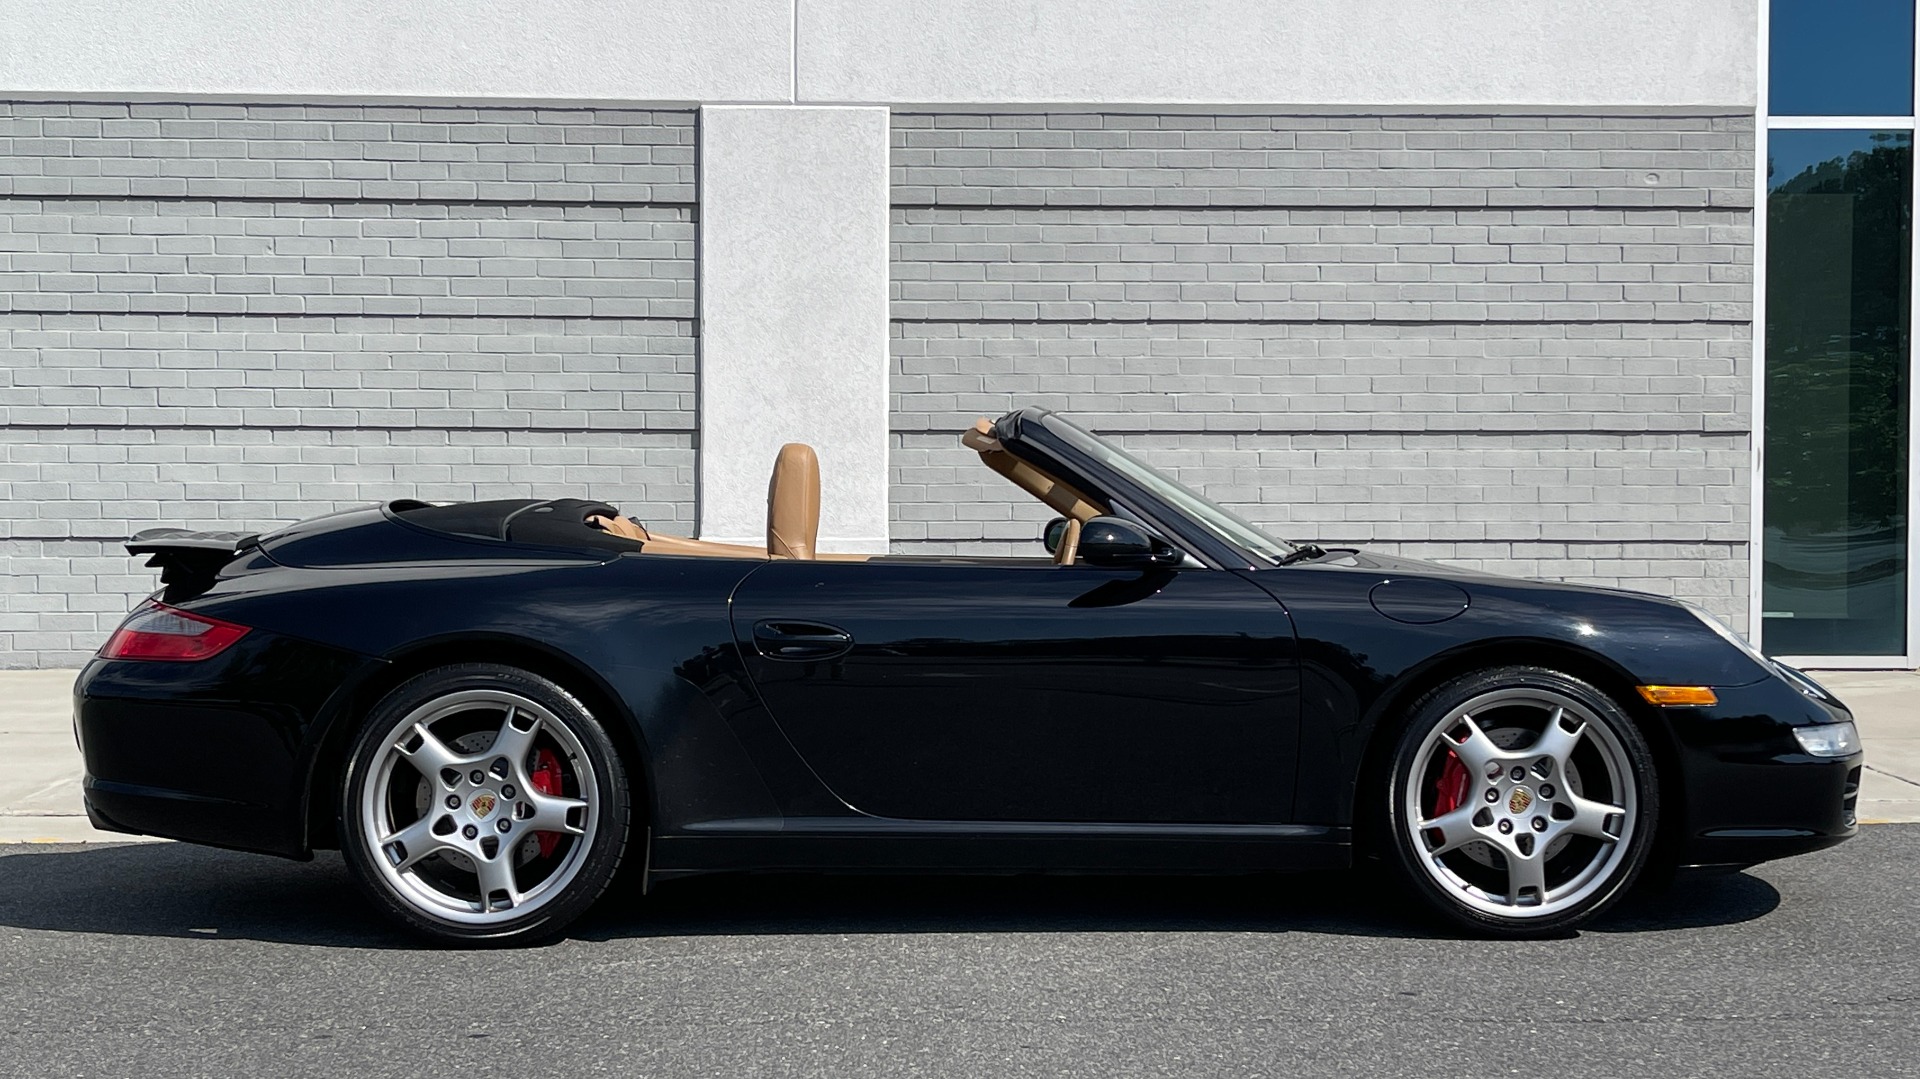 Used 2006 Porsche 911 CARRERA S CABRIOLET / BOSE / CD CHANGER / PWR SEAT PKG / HTD STS for sale $60,999 at Formula Imports in Charlotte NC 28227 3